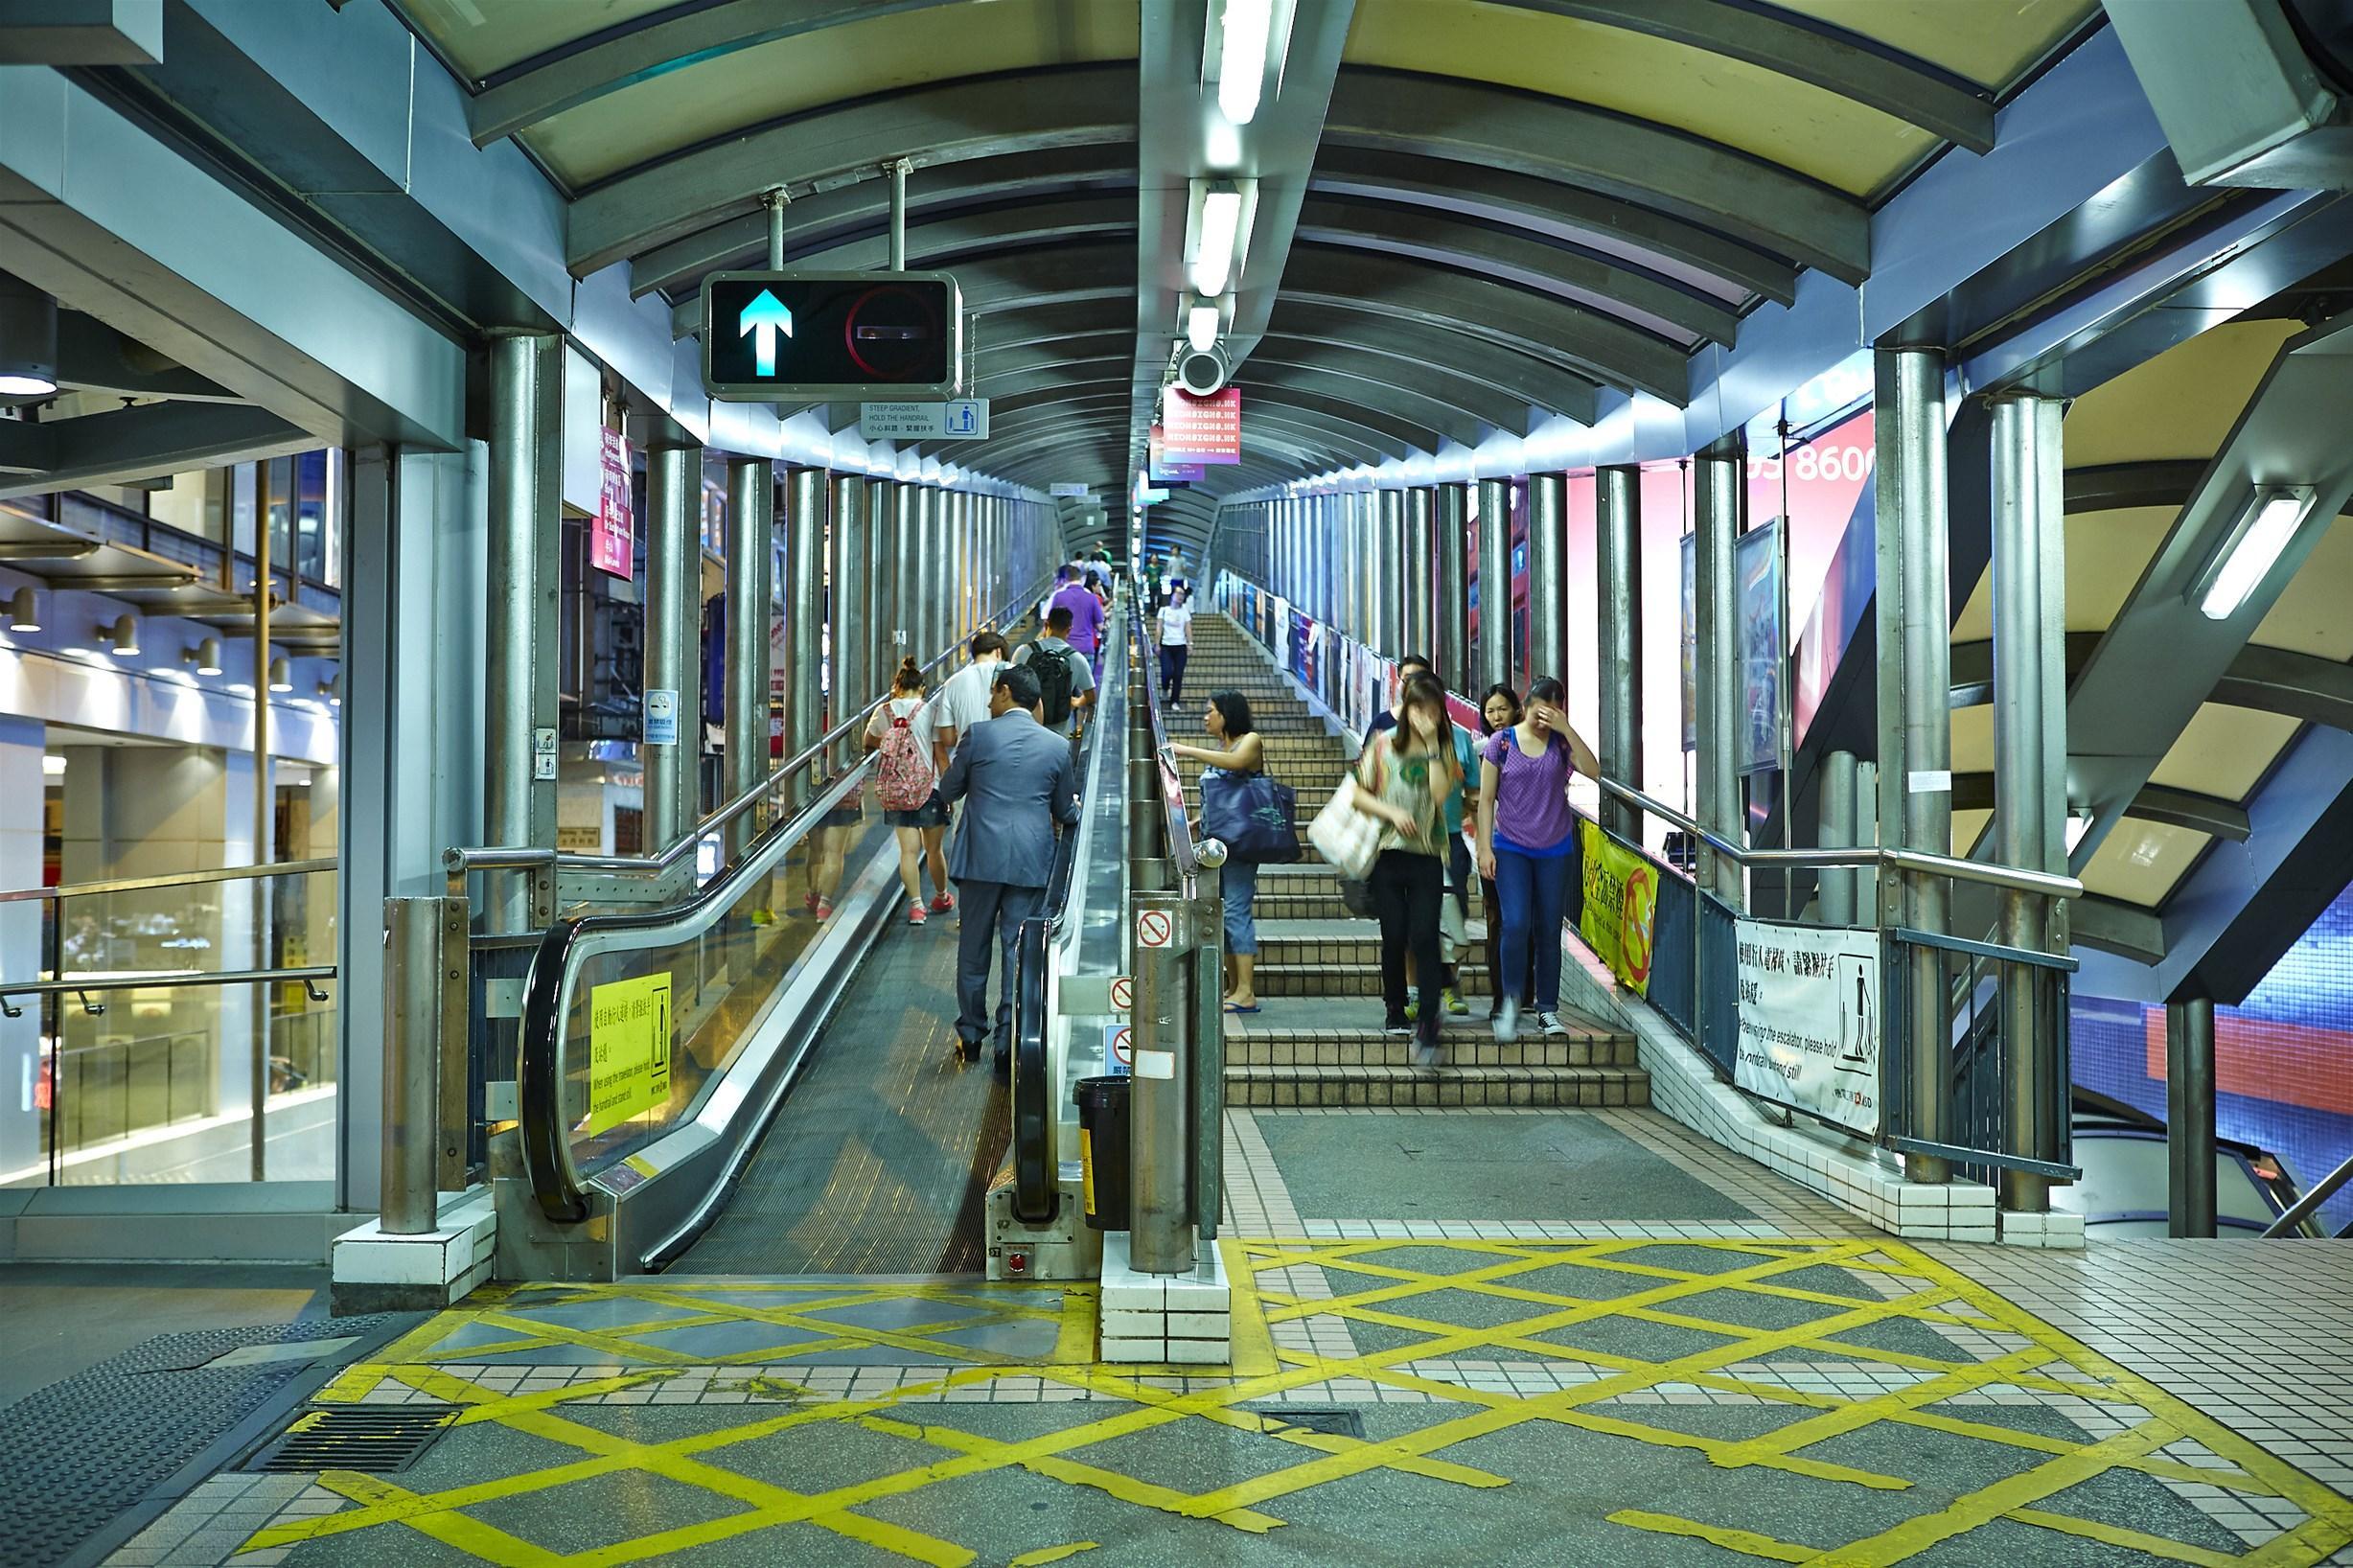 The Mid-Level Escalators were built to connect the city's steep hillside areas to Central (Hong Kong Tourism Board/discoverhongkong.com)